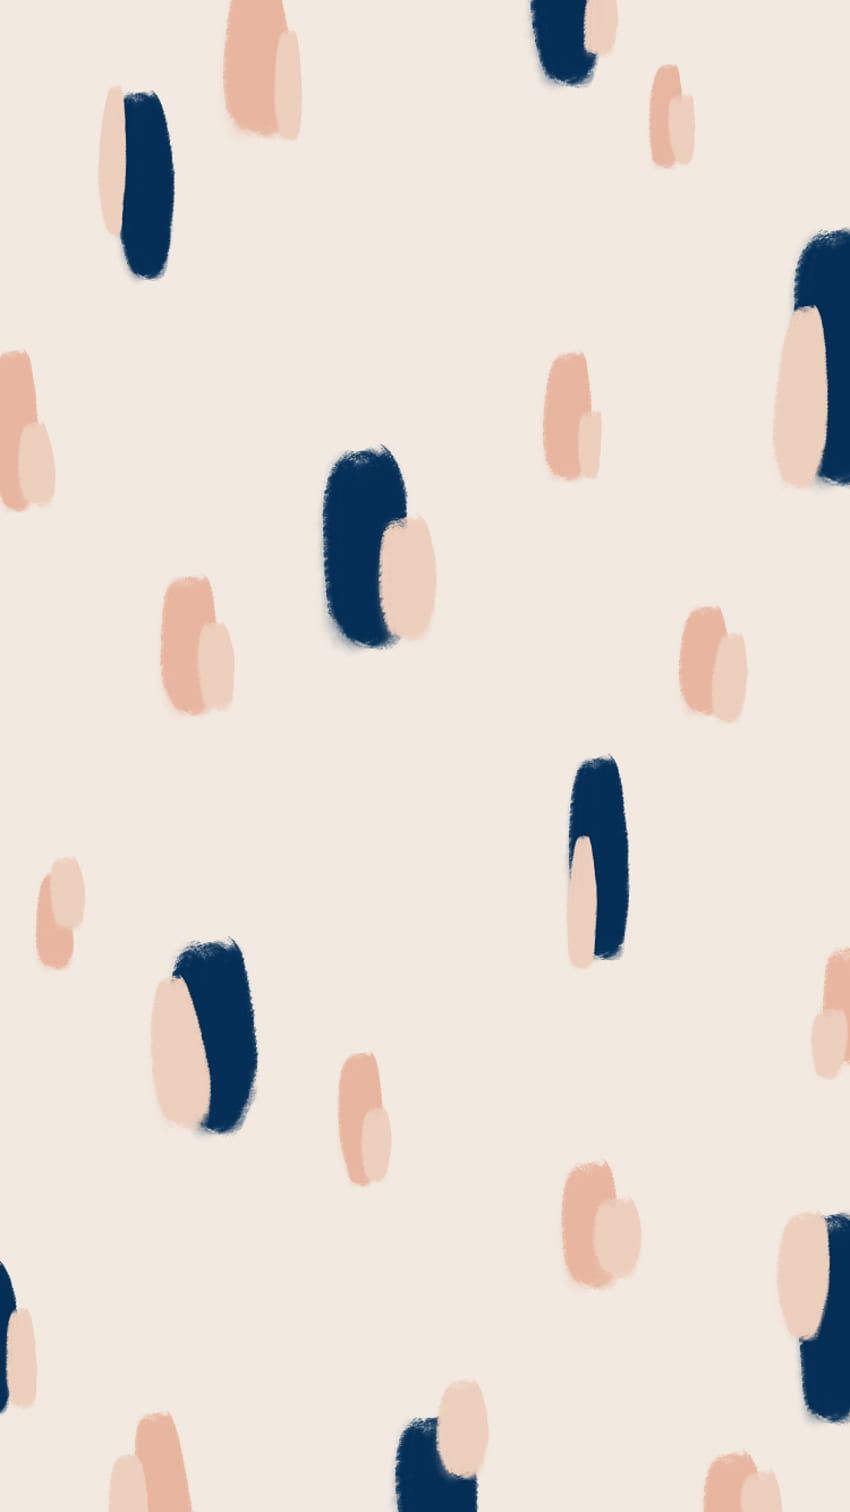 A pattern of abstract shapes in navy and pink on a cream background - Design